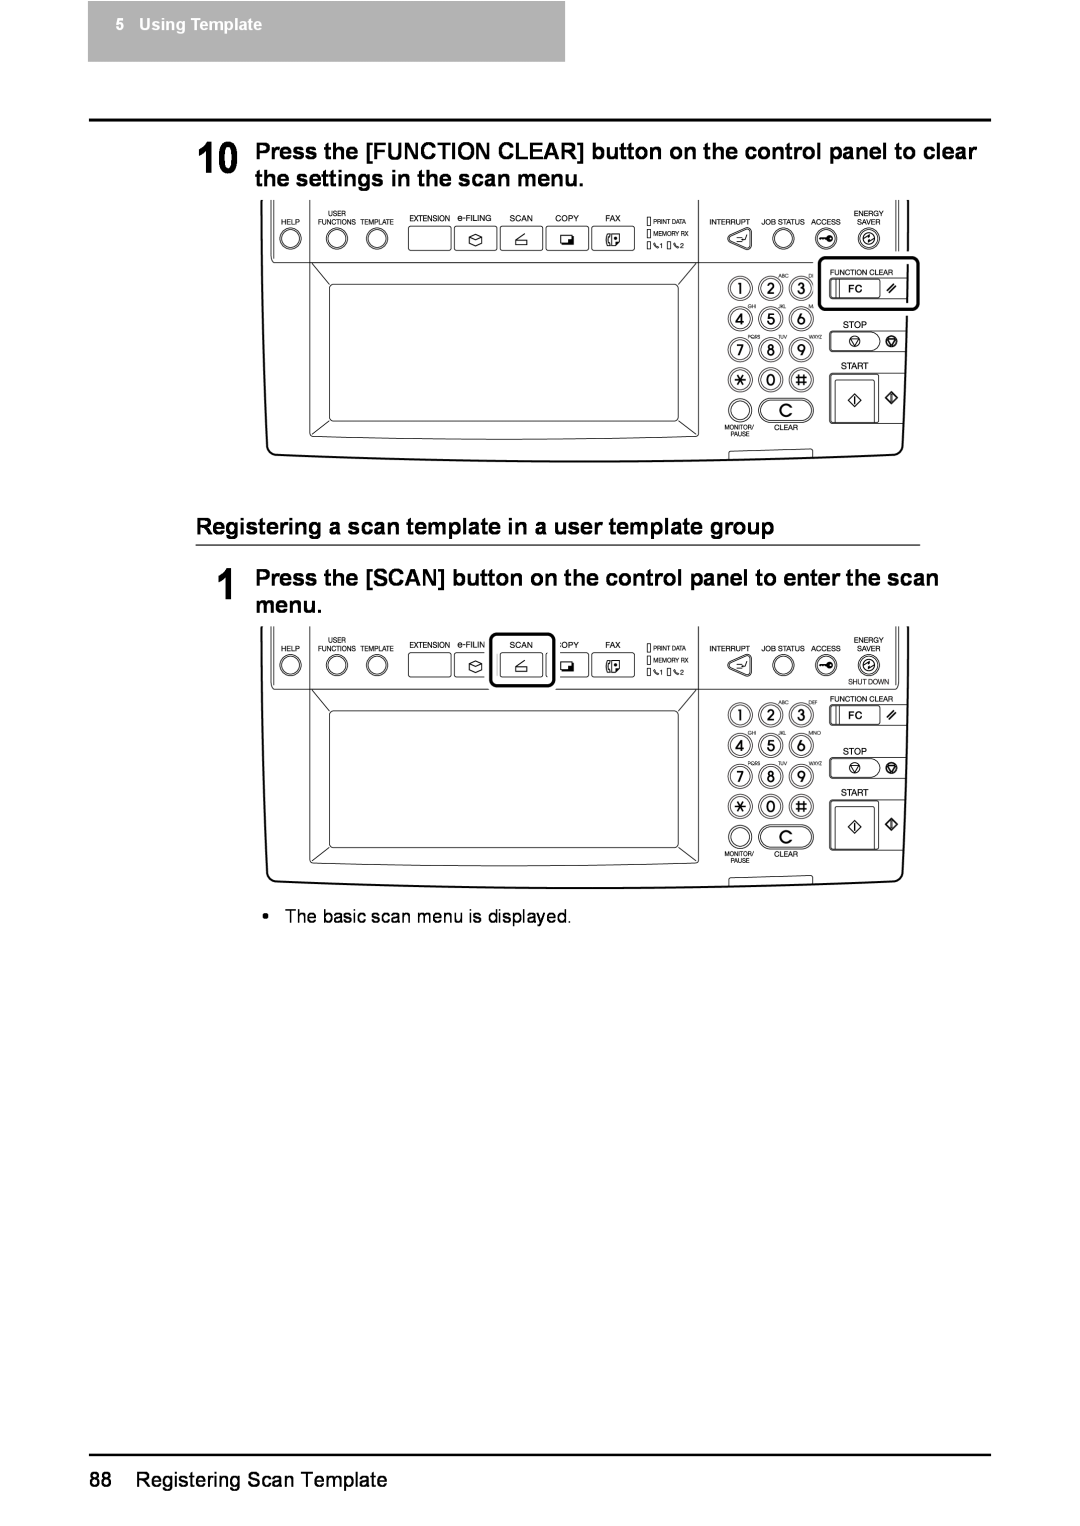 Toshiba 3500C, 2500C, 3510C Registering a scan template in a user template group, Registering Scan Template, Using Template 